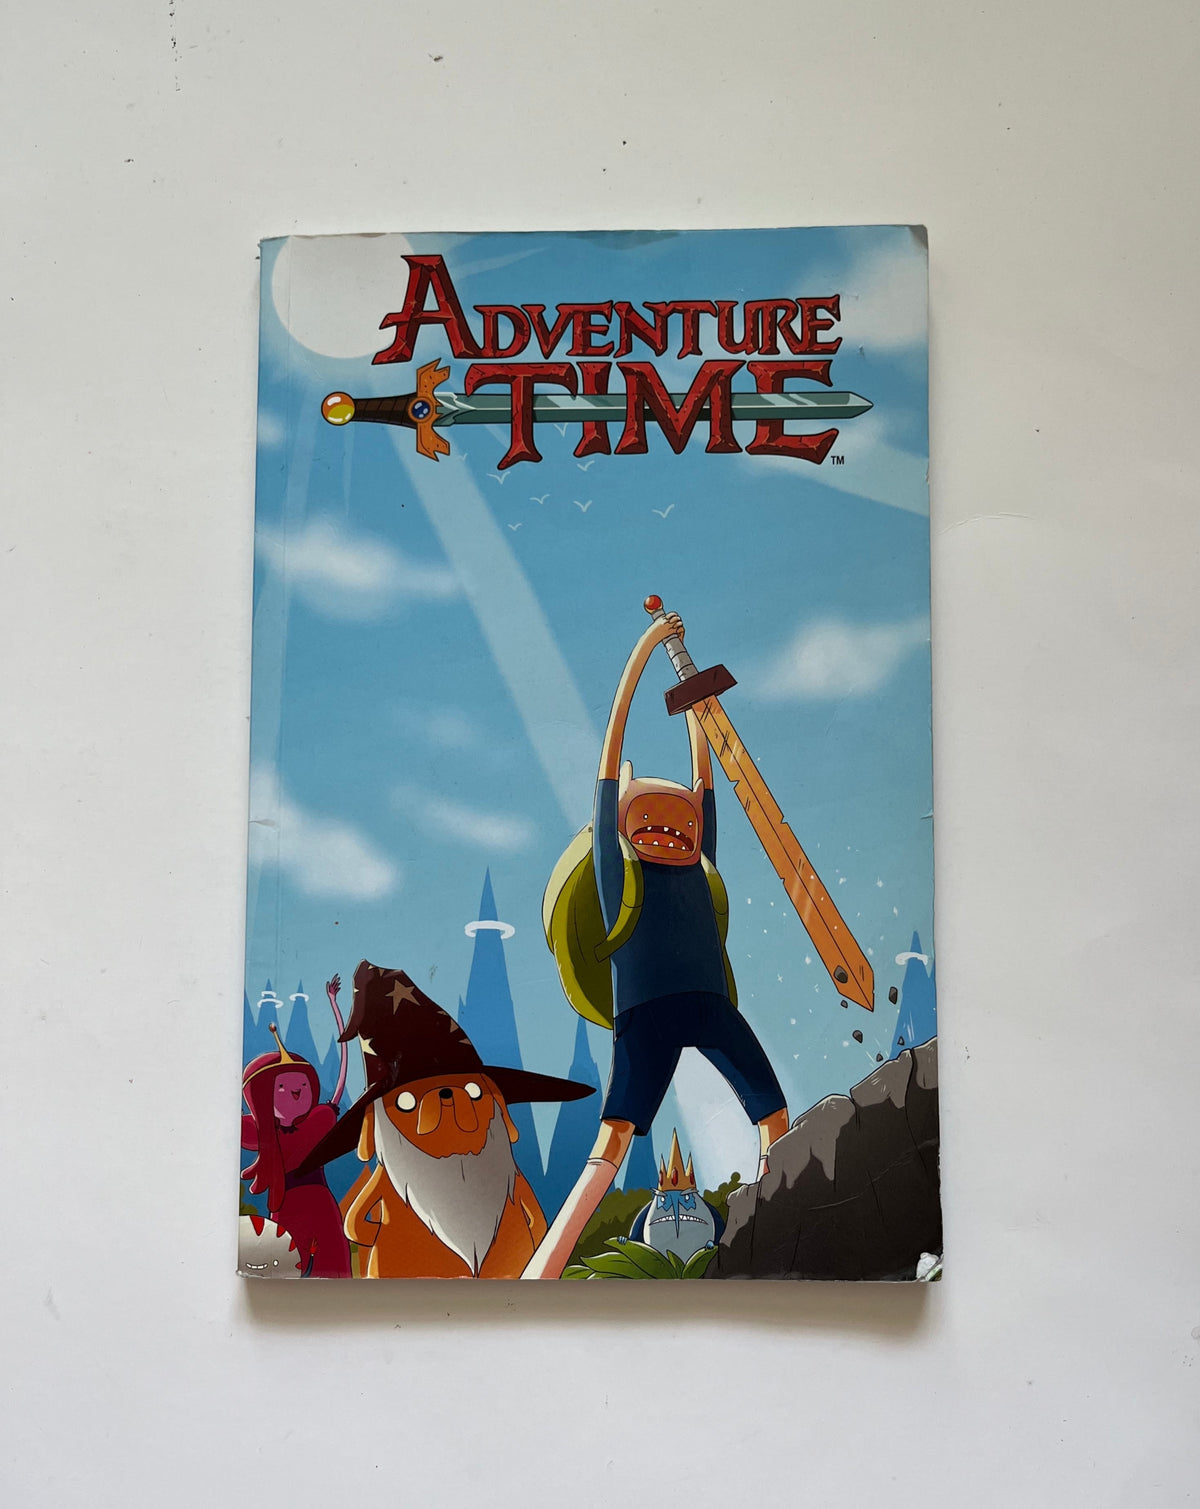 Adventure Time: Volume 5 created by Pendleton Ward